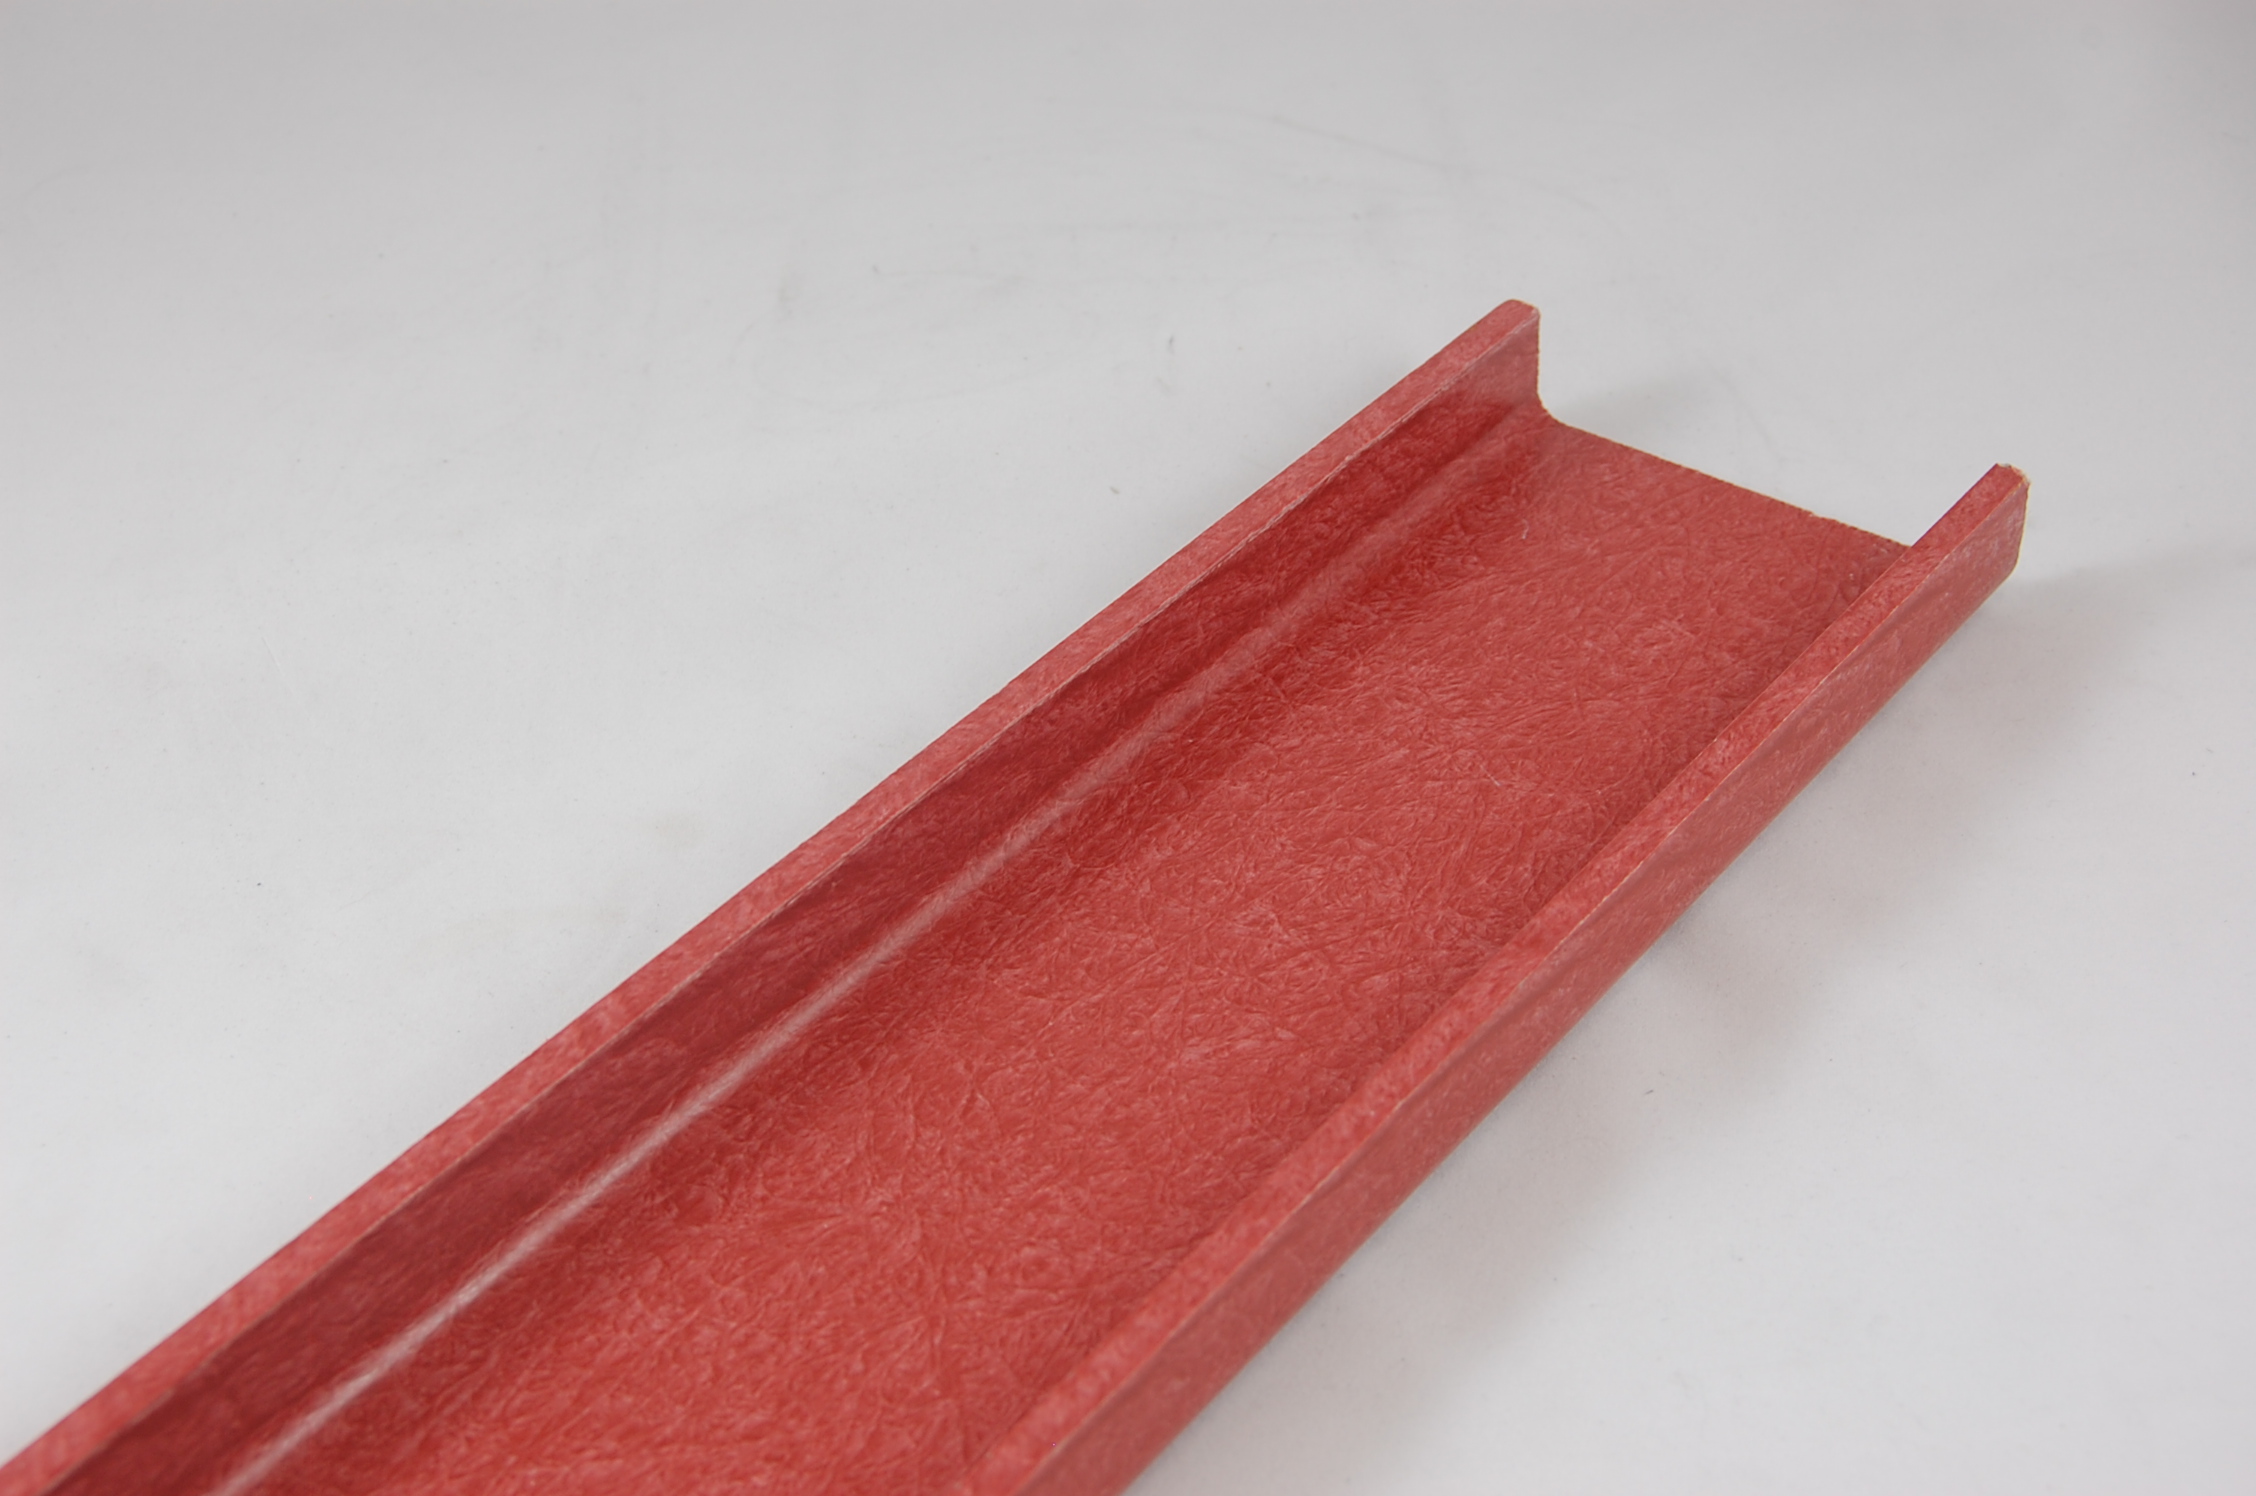 6-3/8"W x 2" Leg x 9/32" thick GLASROD® Grade 1130 Fiberglass-Reinforced Polyester Laminate Channel, red,  120"L channel